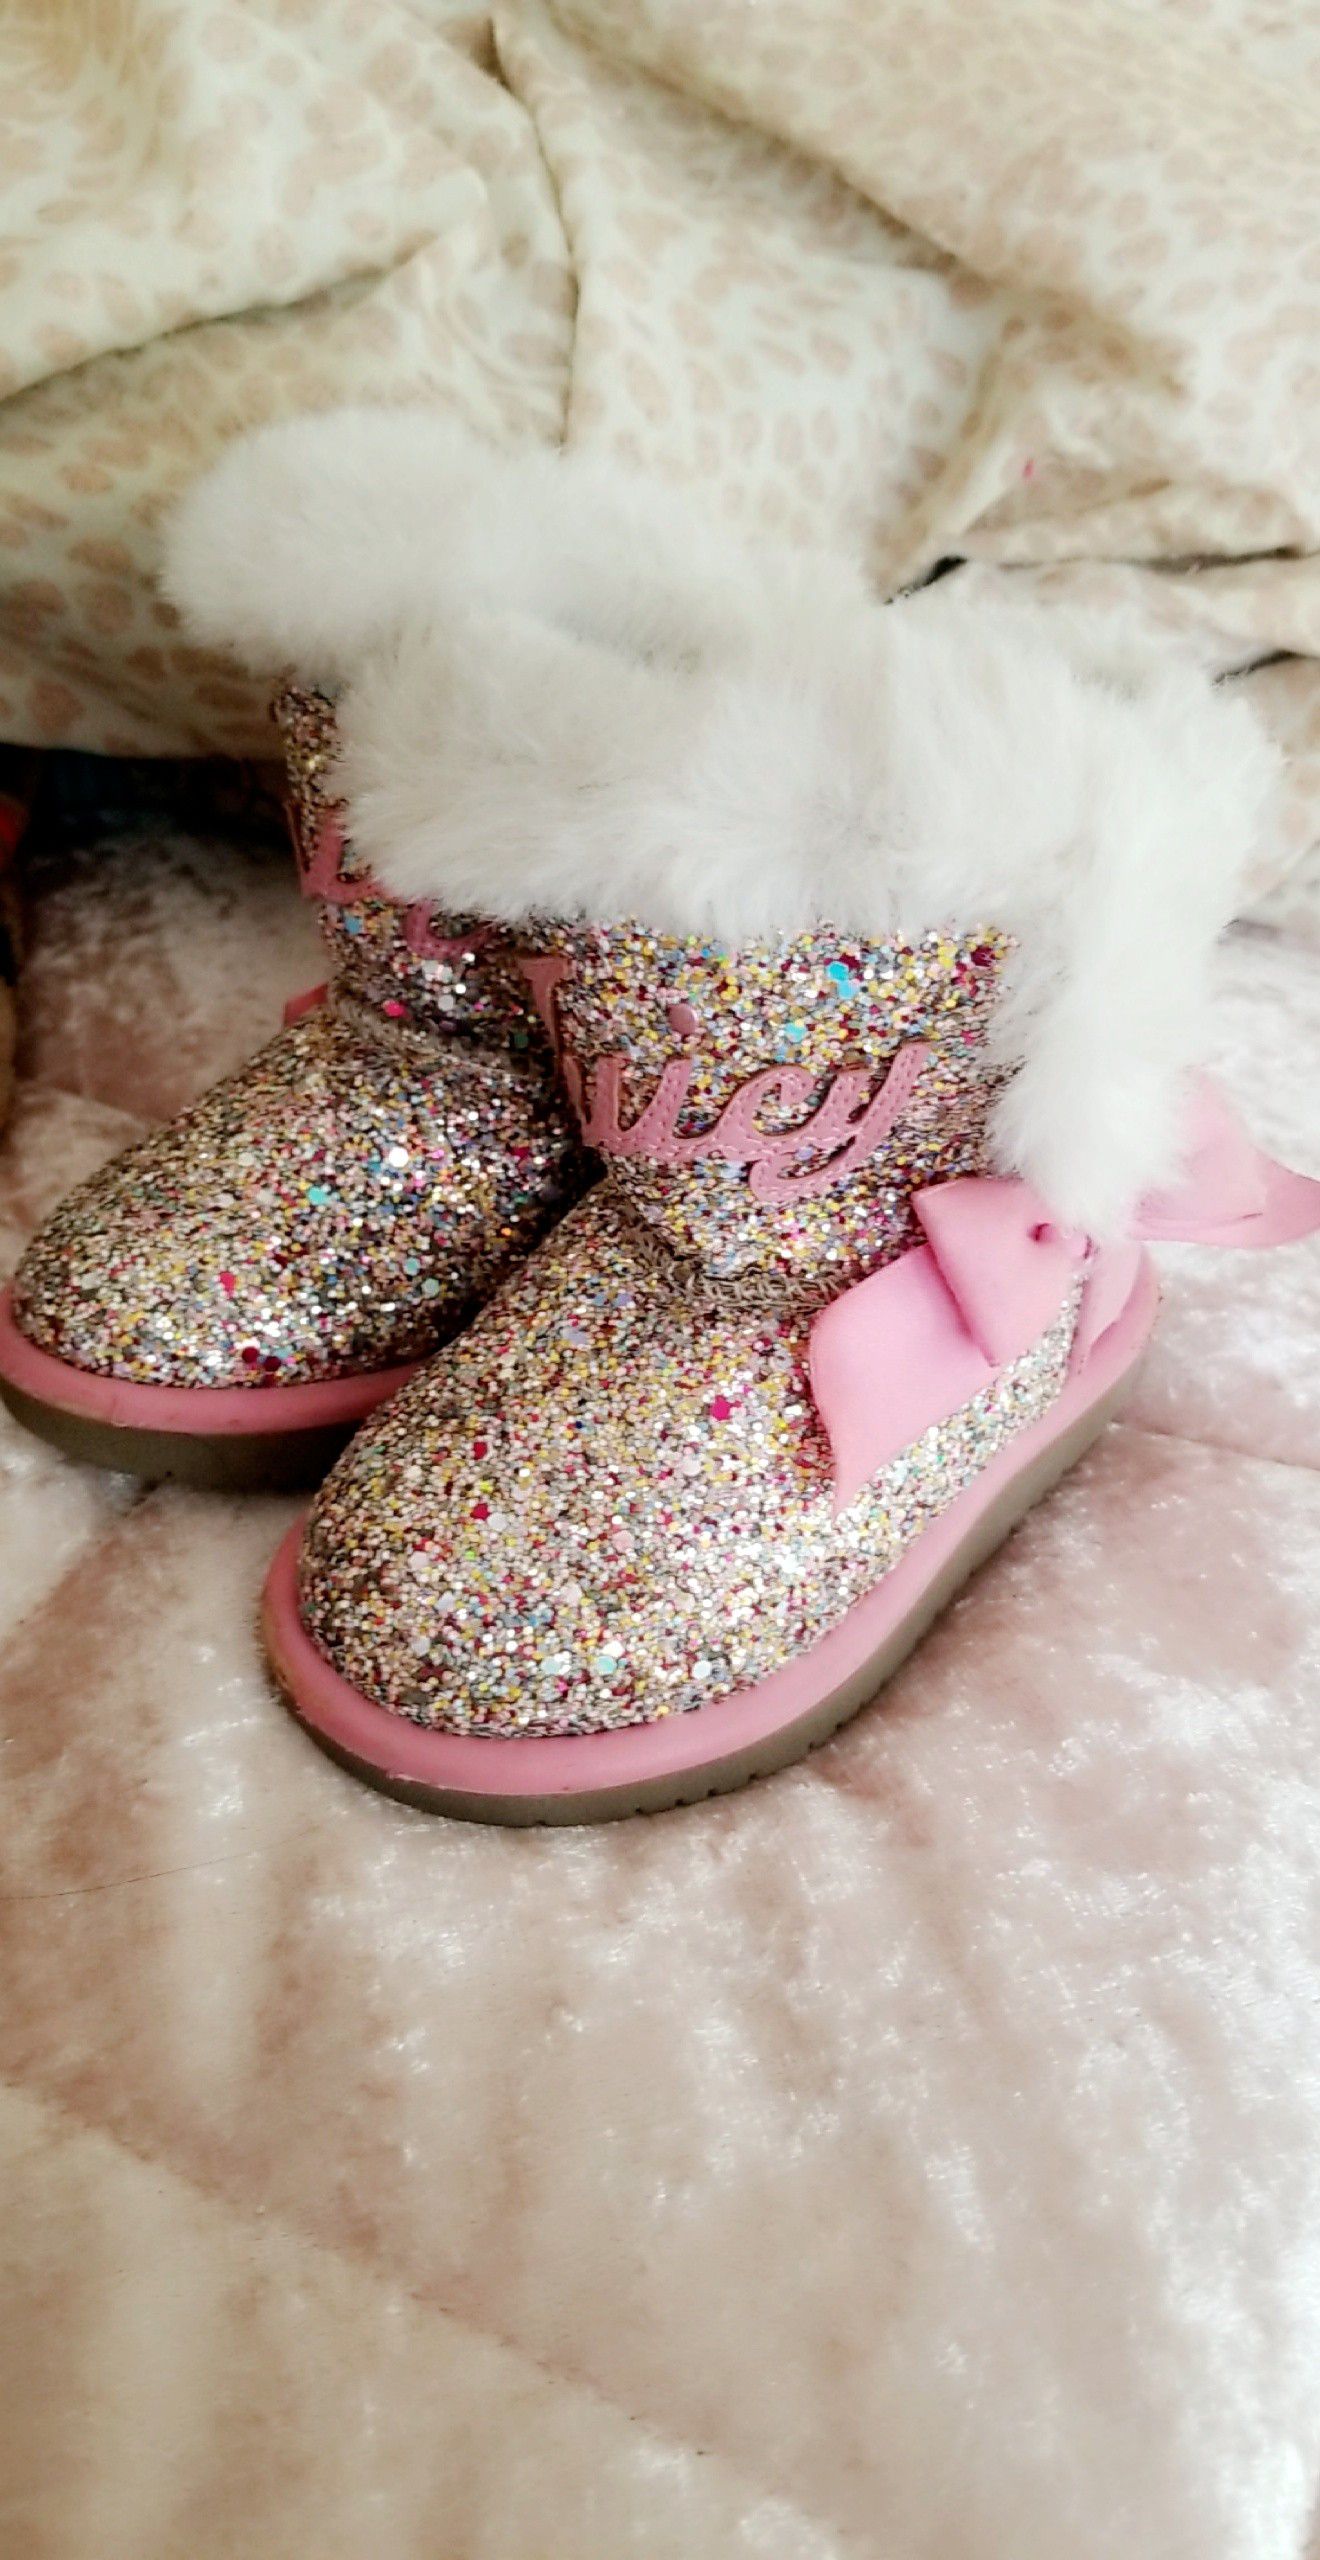 Jucy couture boots in good condition size 6 in toddler girl!